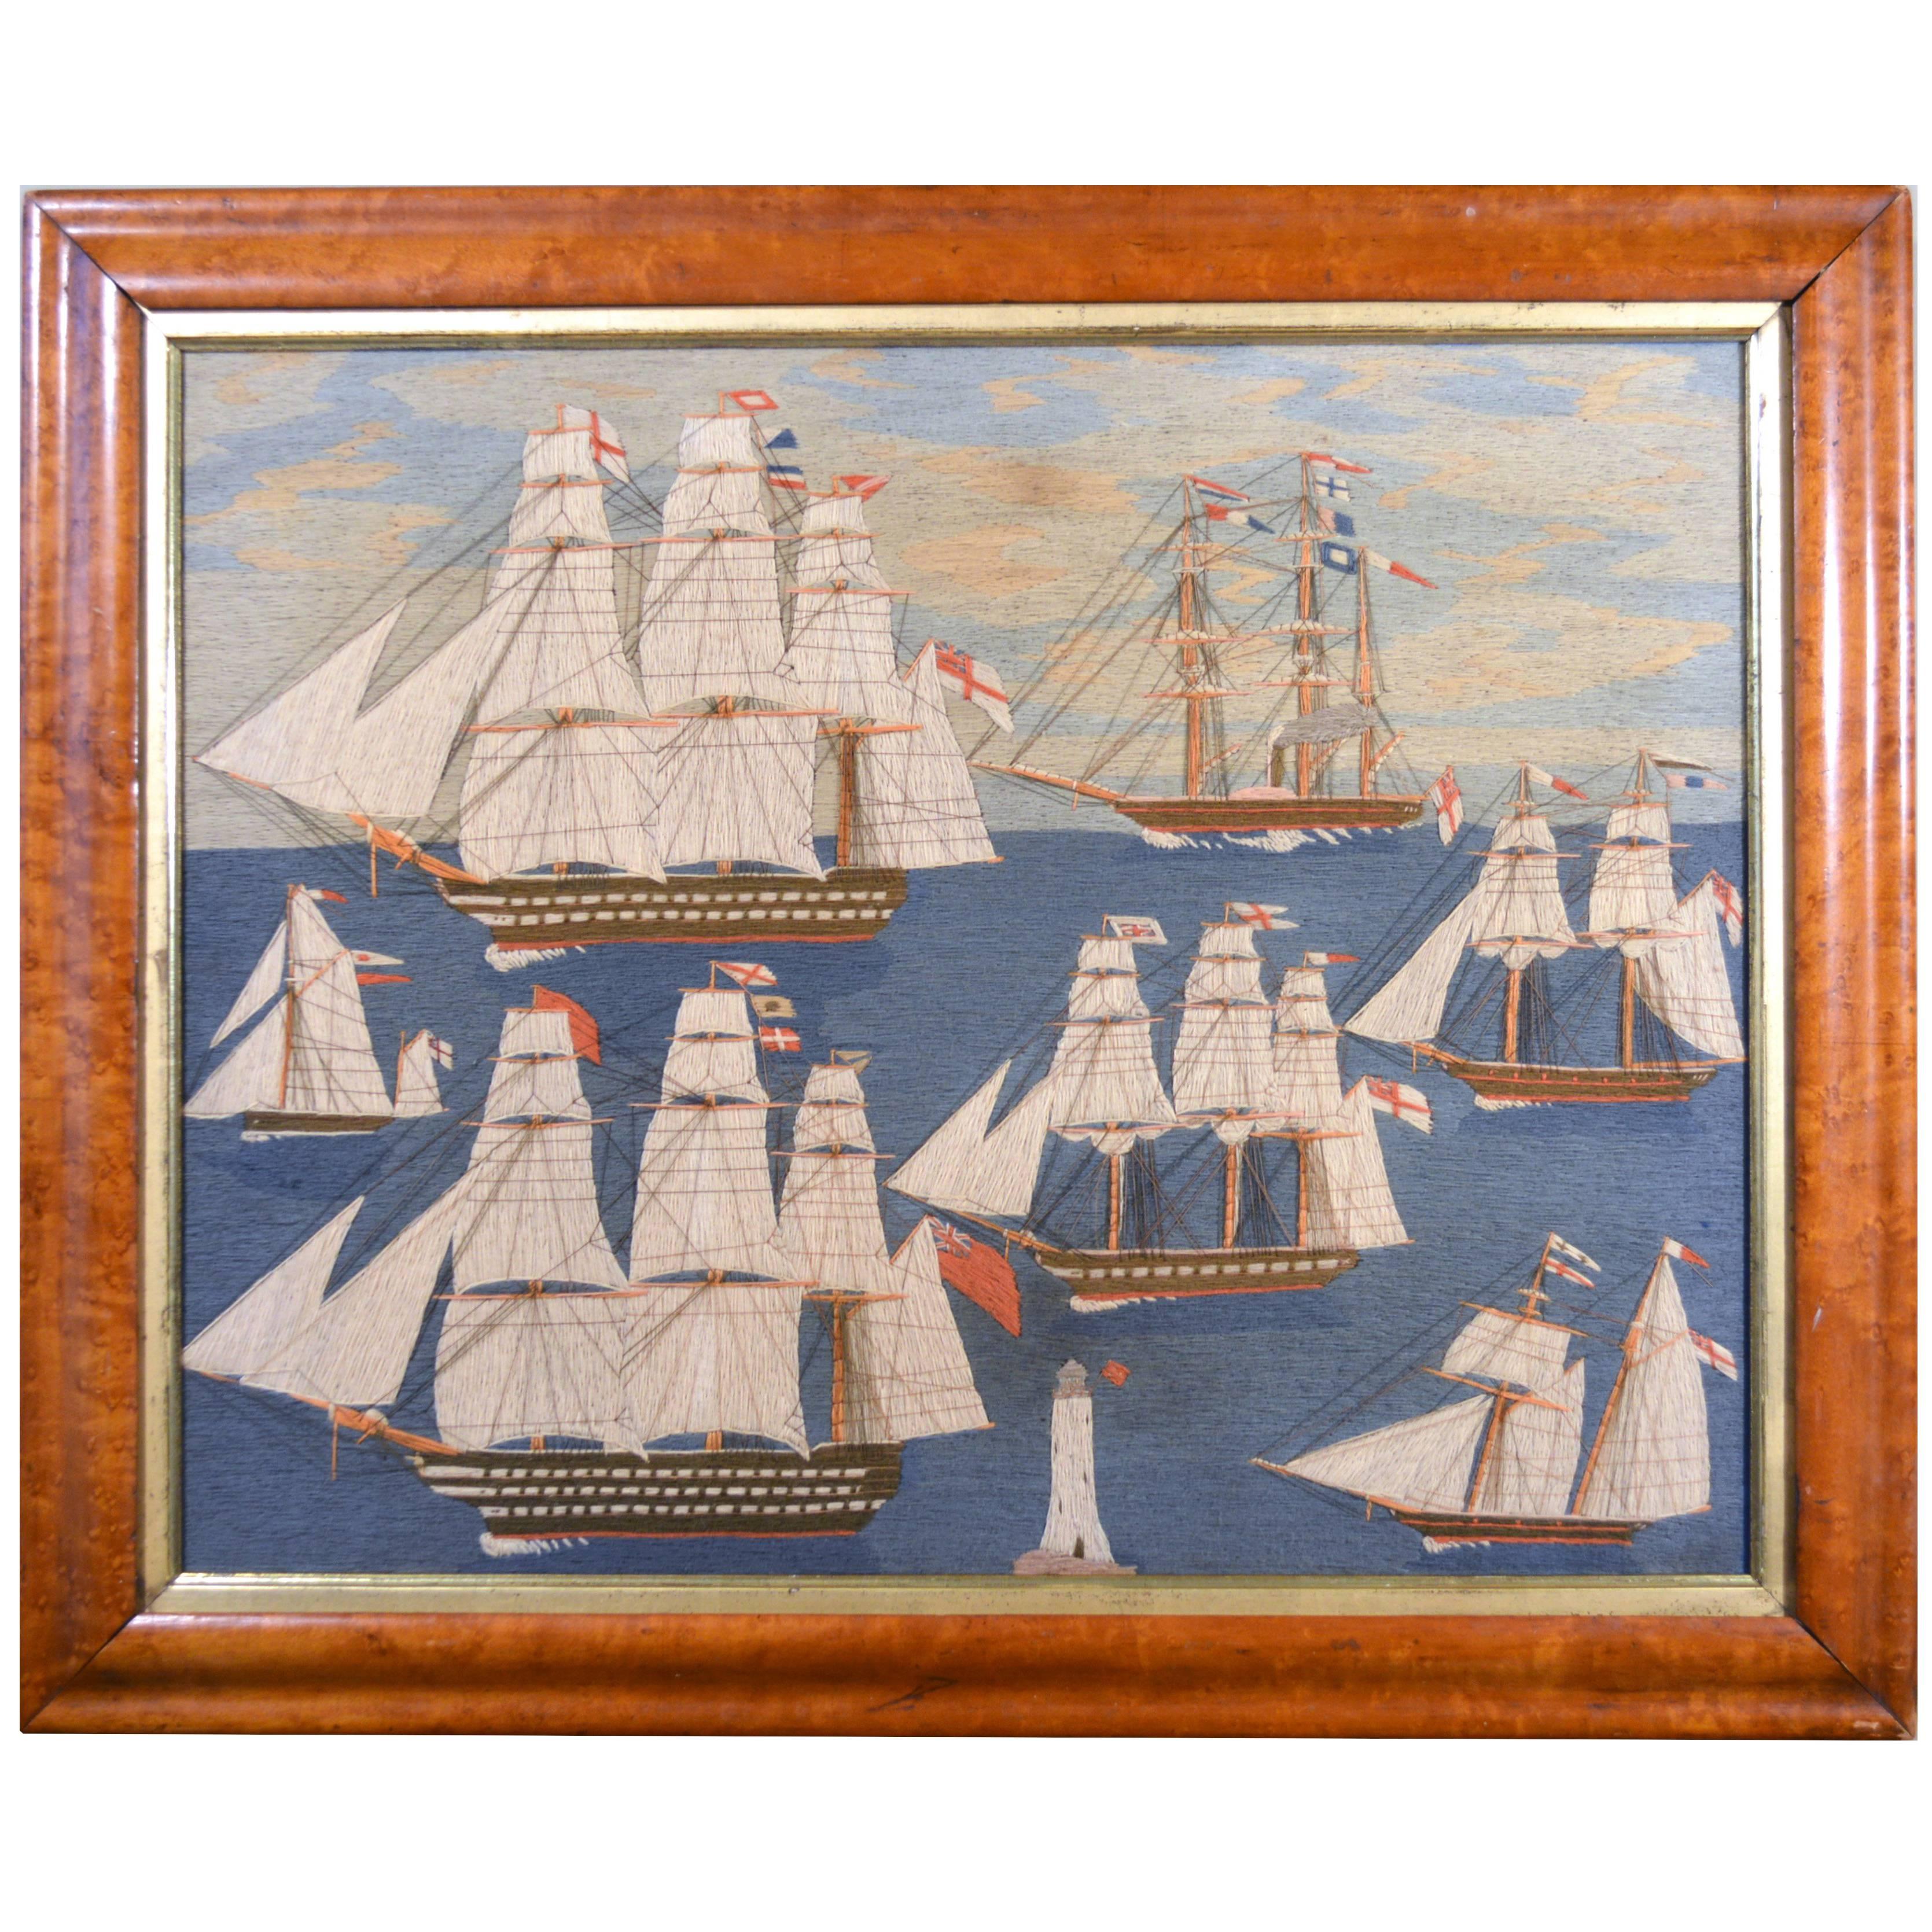 British Sailor's Large Woolwork Woolie with Seven Royal Navy Ships